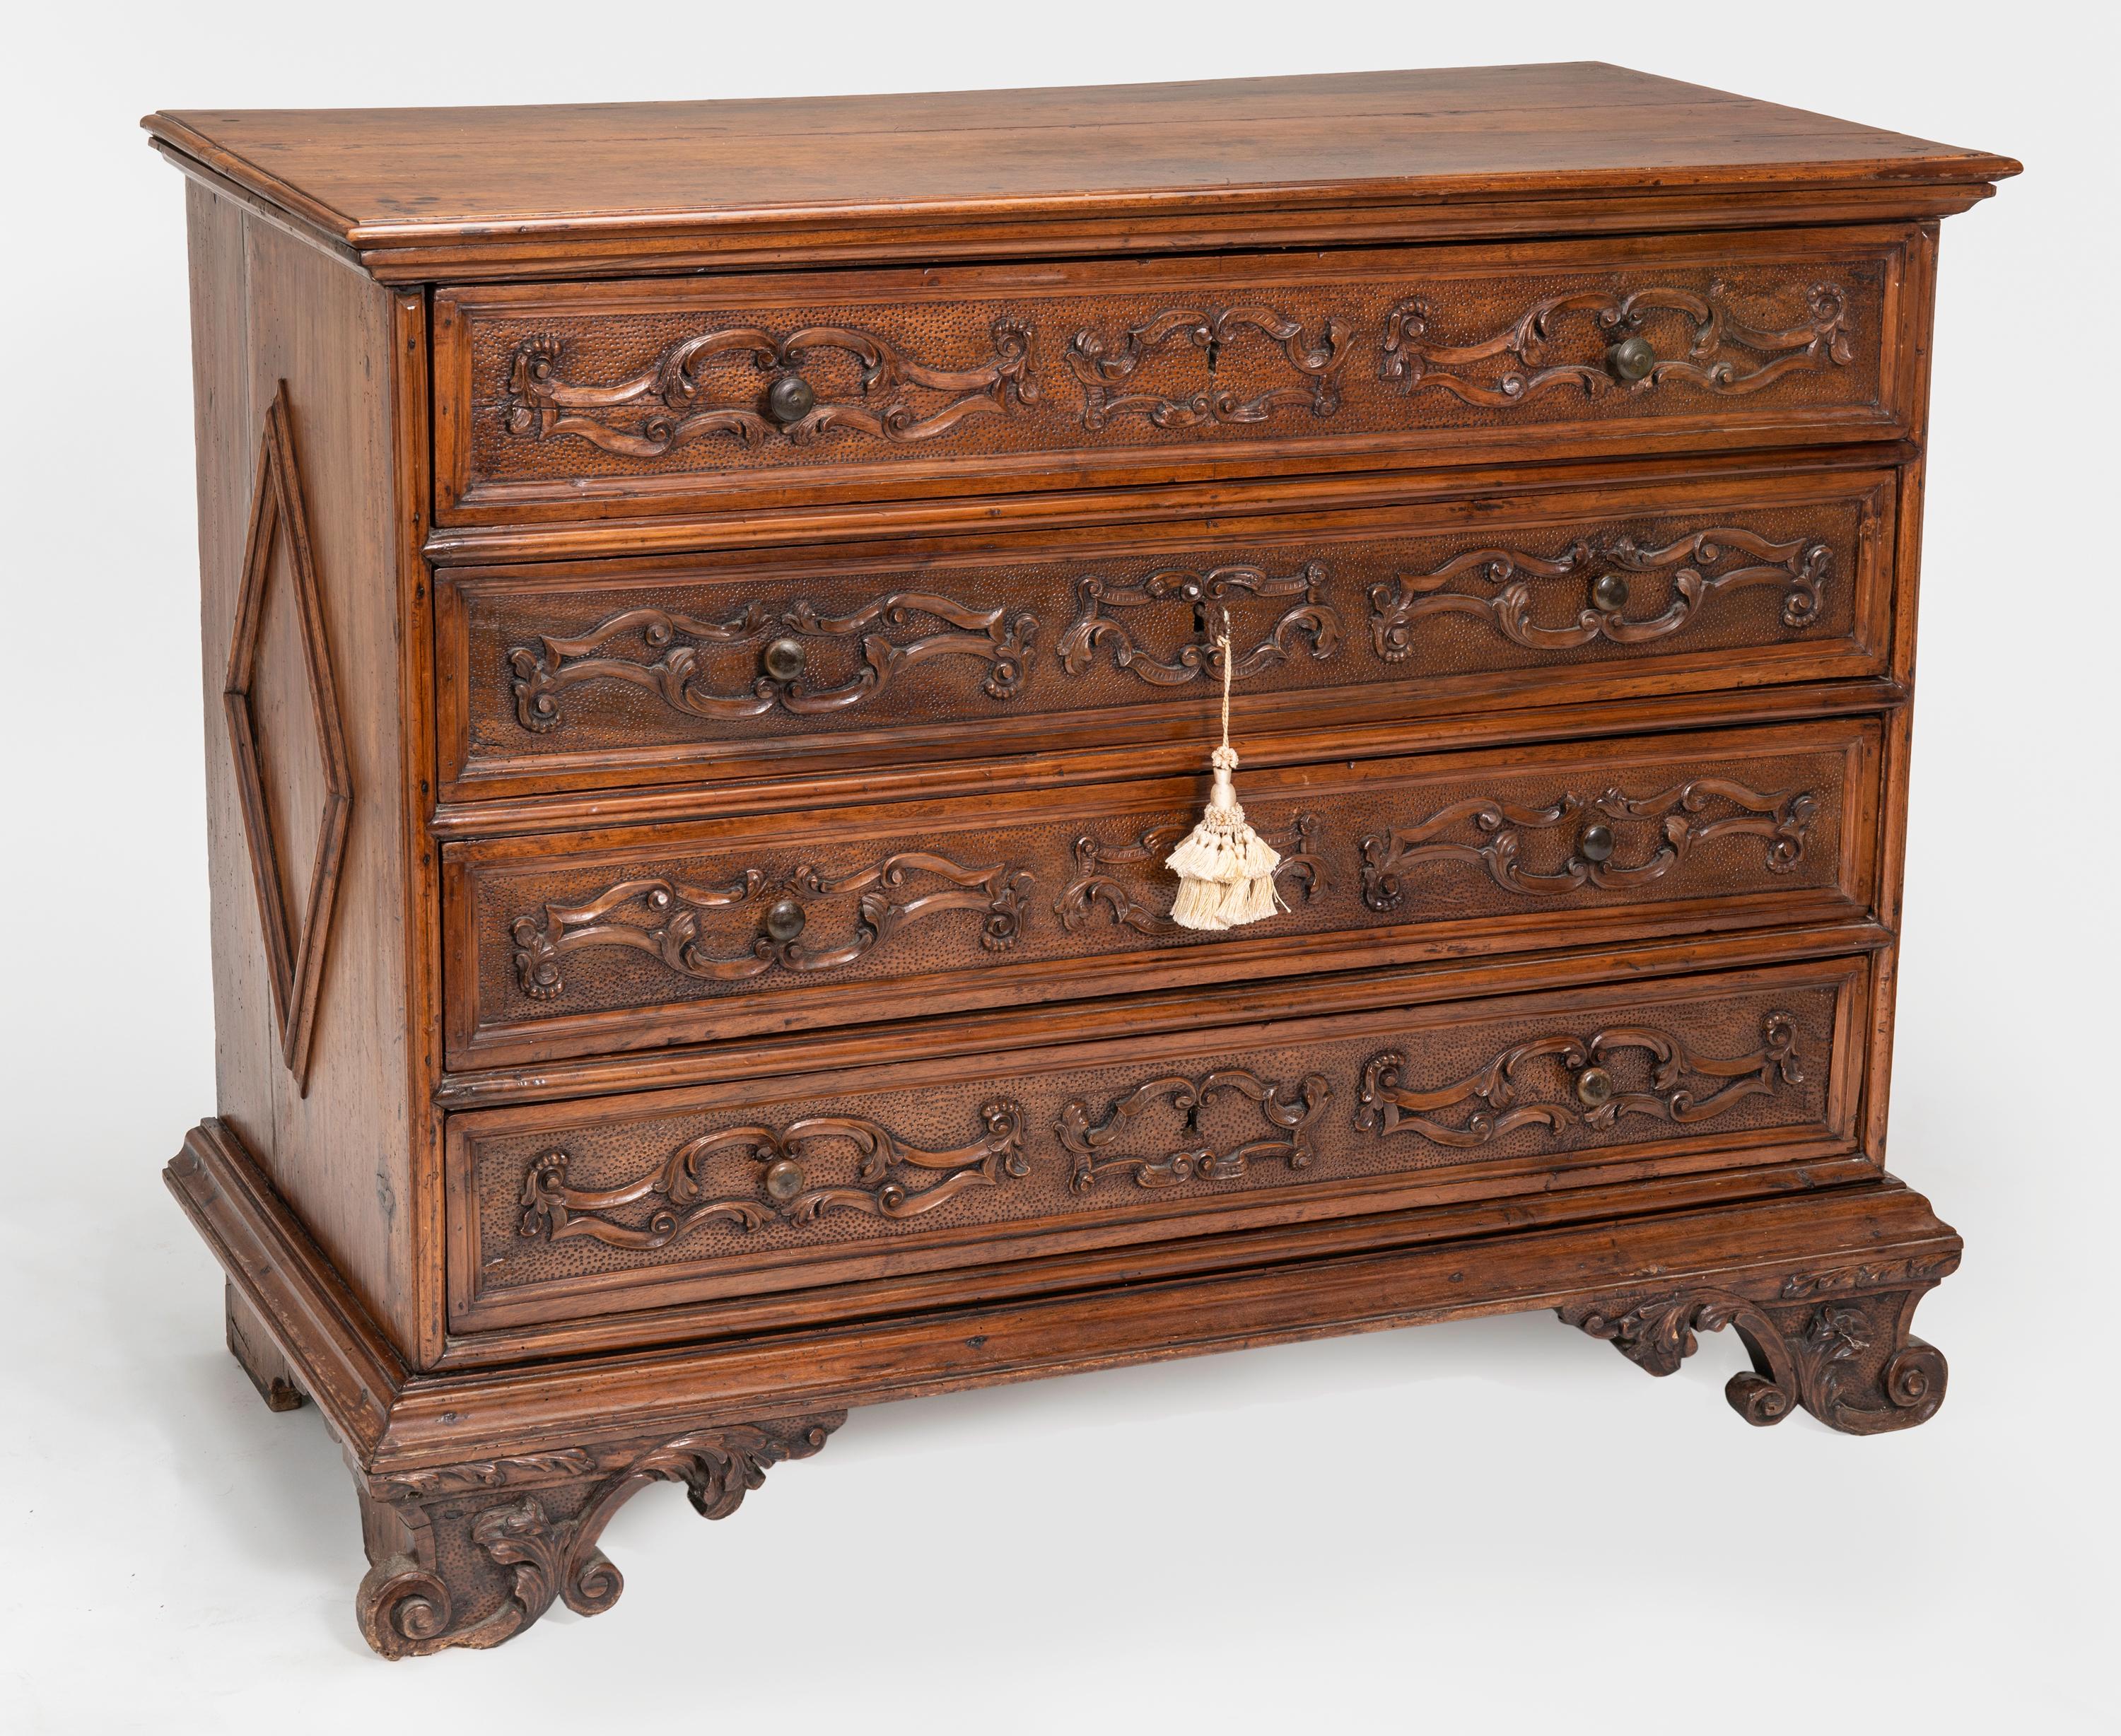 Magnificent, early 19th century, beautifully carved walnut chest of drawers. Probably from Northern France. Measures: 55” wide, 42” high, 24” deep. Four large carved front drawers. Carved feet and simple carved triangular panel sides. Most beautiful